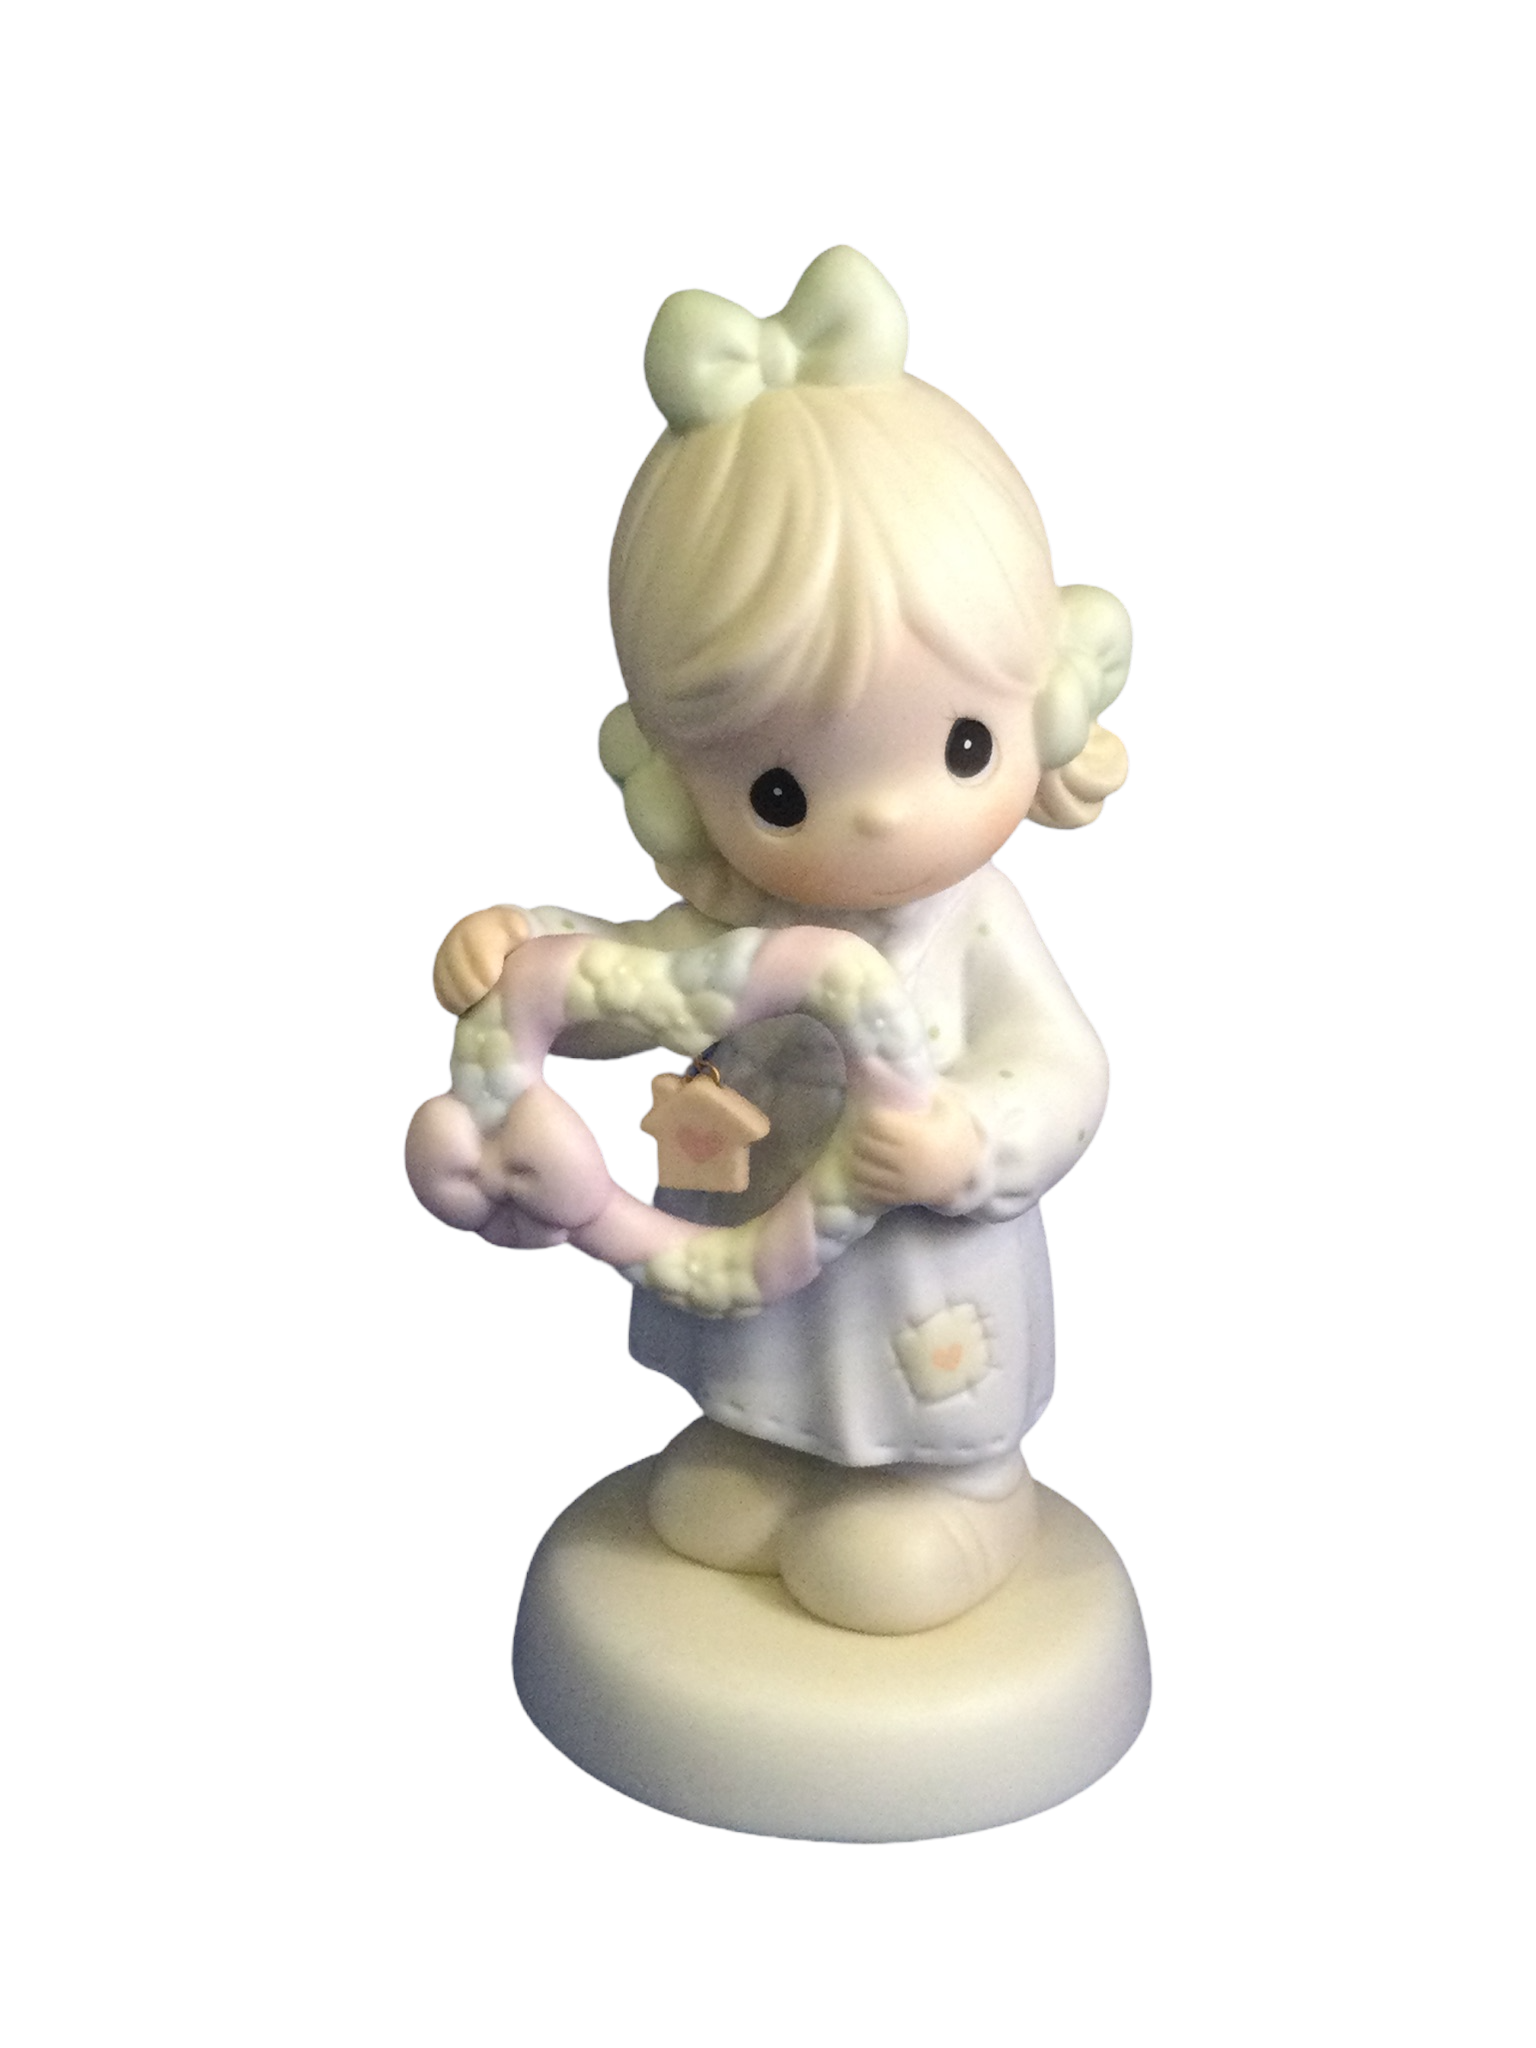 Home Is Where The Heart Is - Precious Moment Figurine